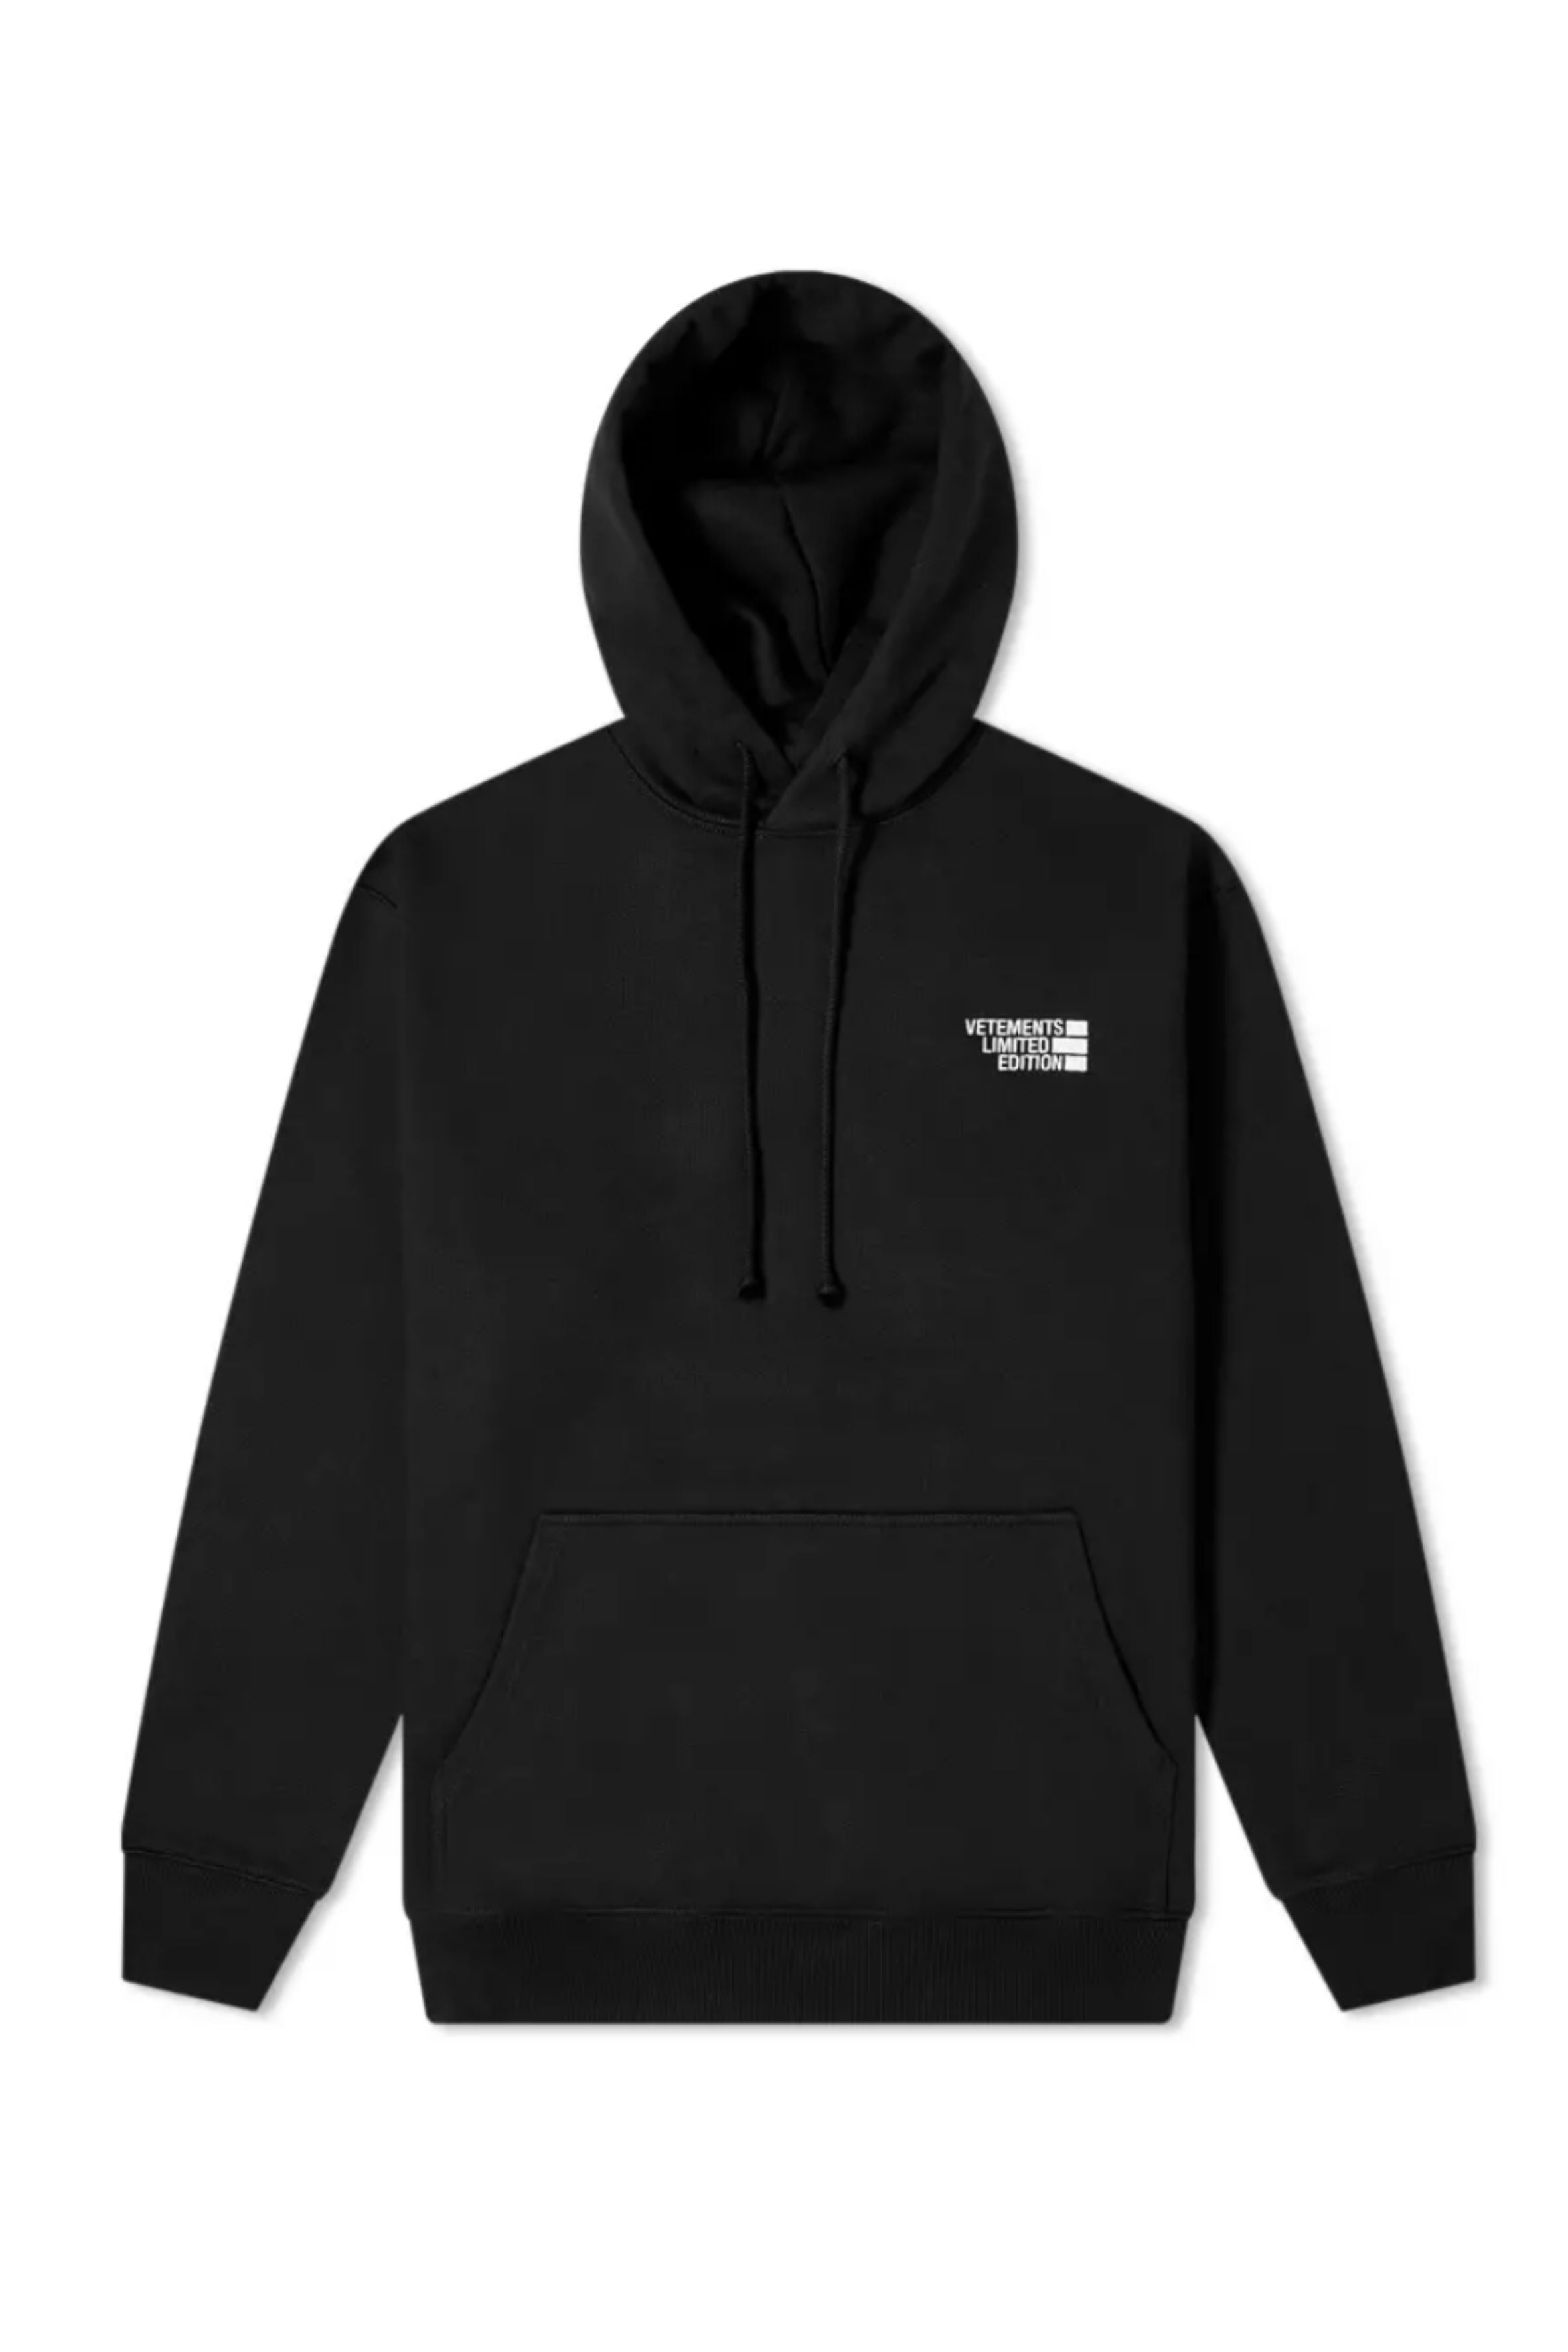 Vetements Logo Limited Edition Hoodie – Curated by Charbel